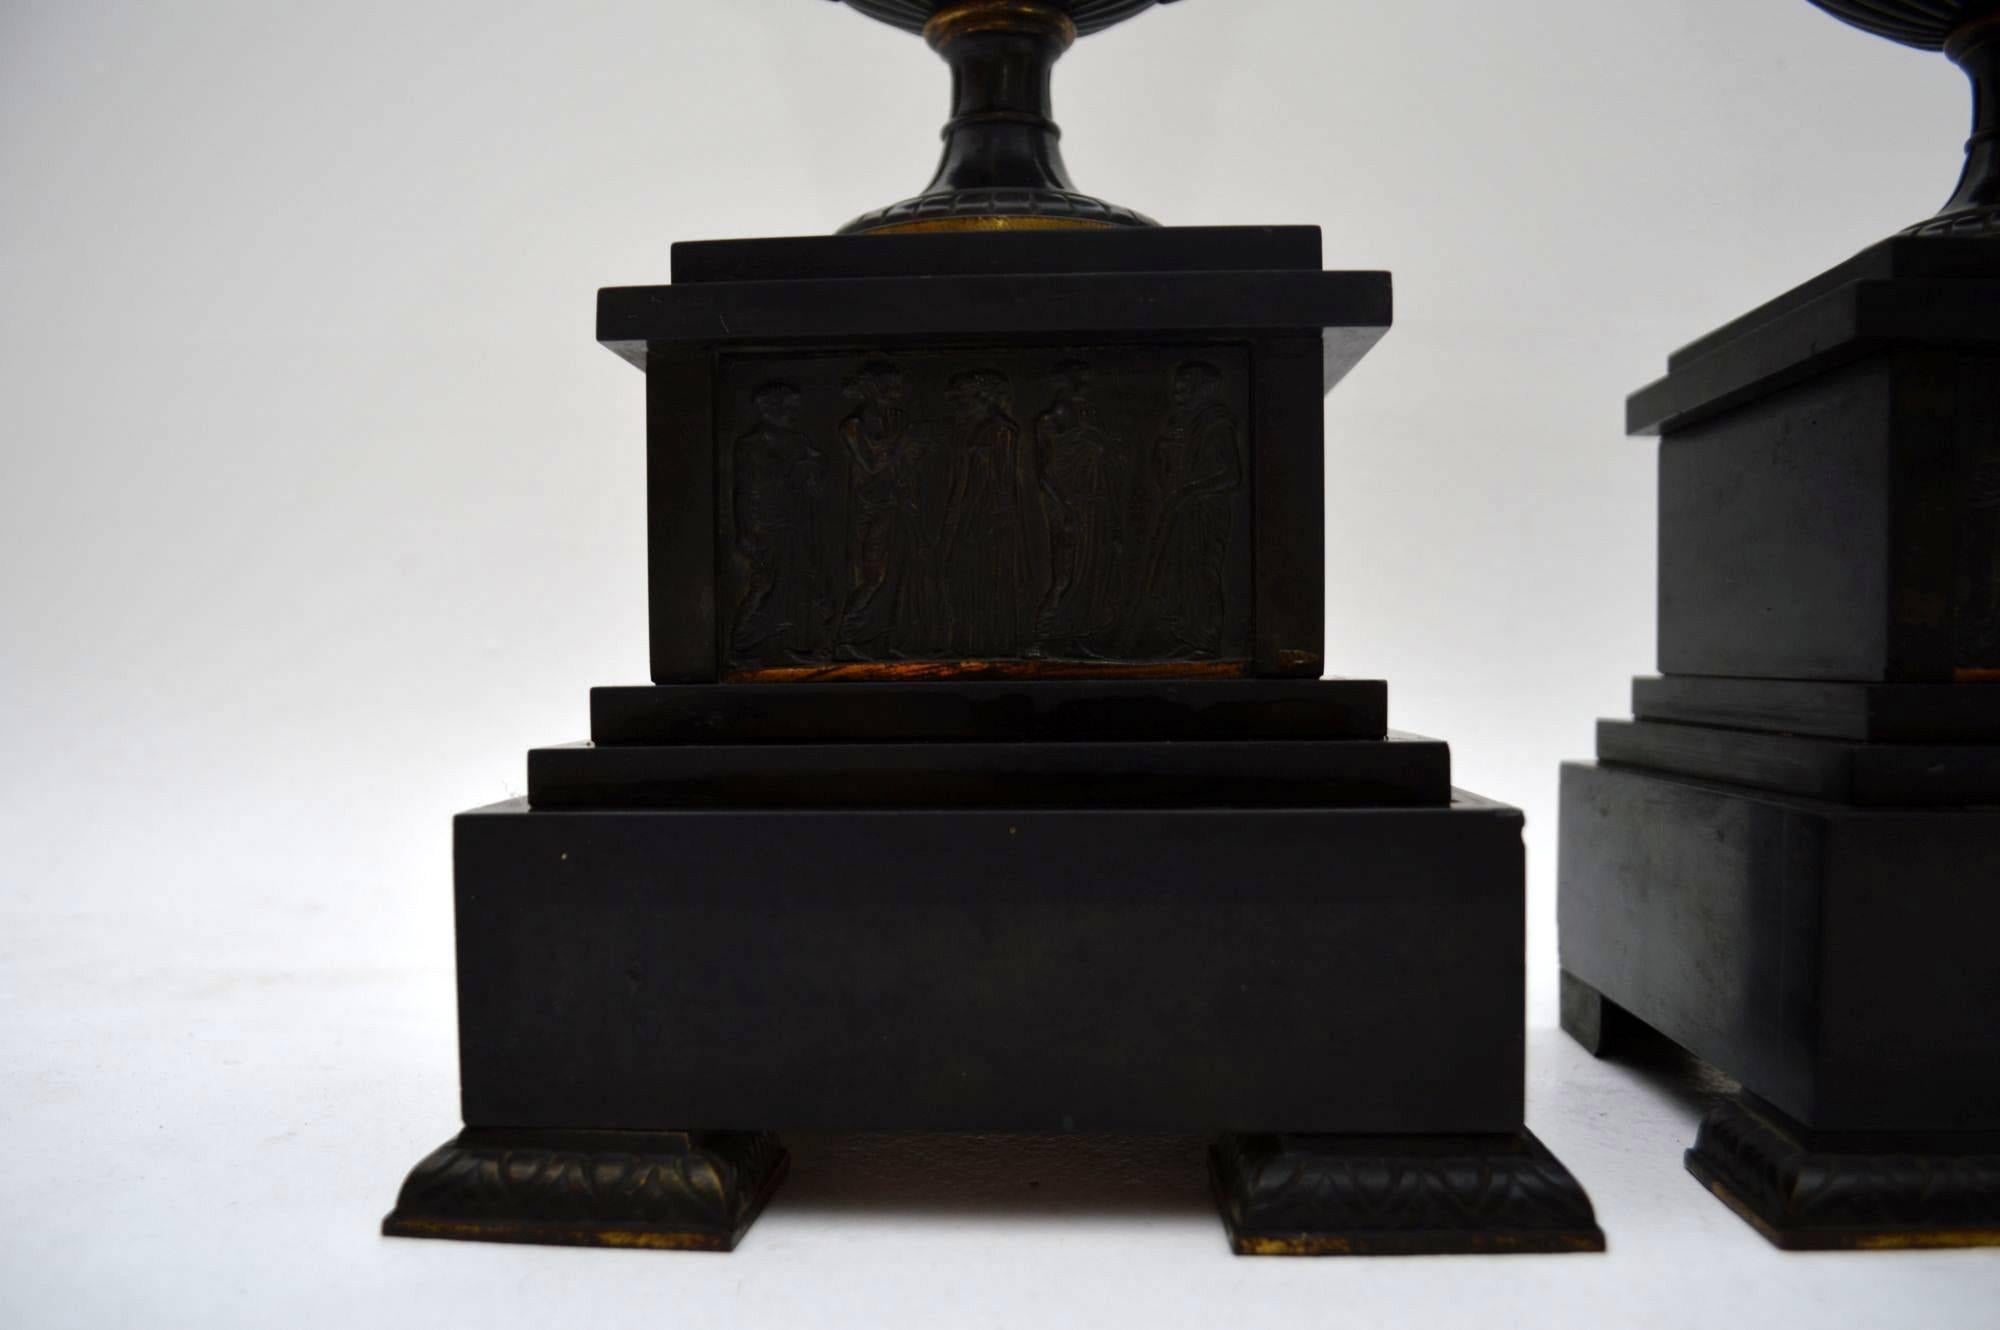 Pair of antique neoclassical bronze urns sitting on black marble bases in good original condition and with a nice patina. The urns themselves are embossed with warriors on chariots and the bases too have similar relief work on the fronts. These are